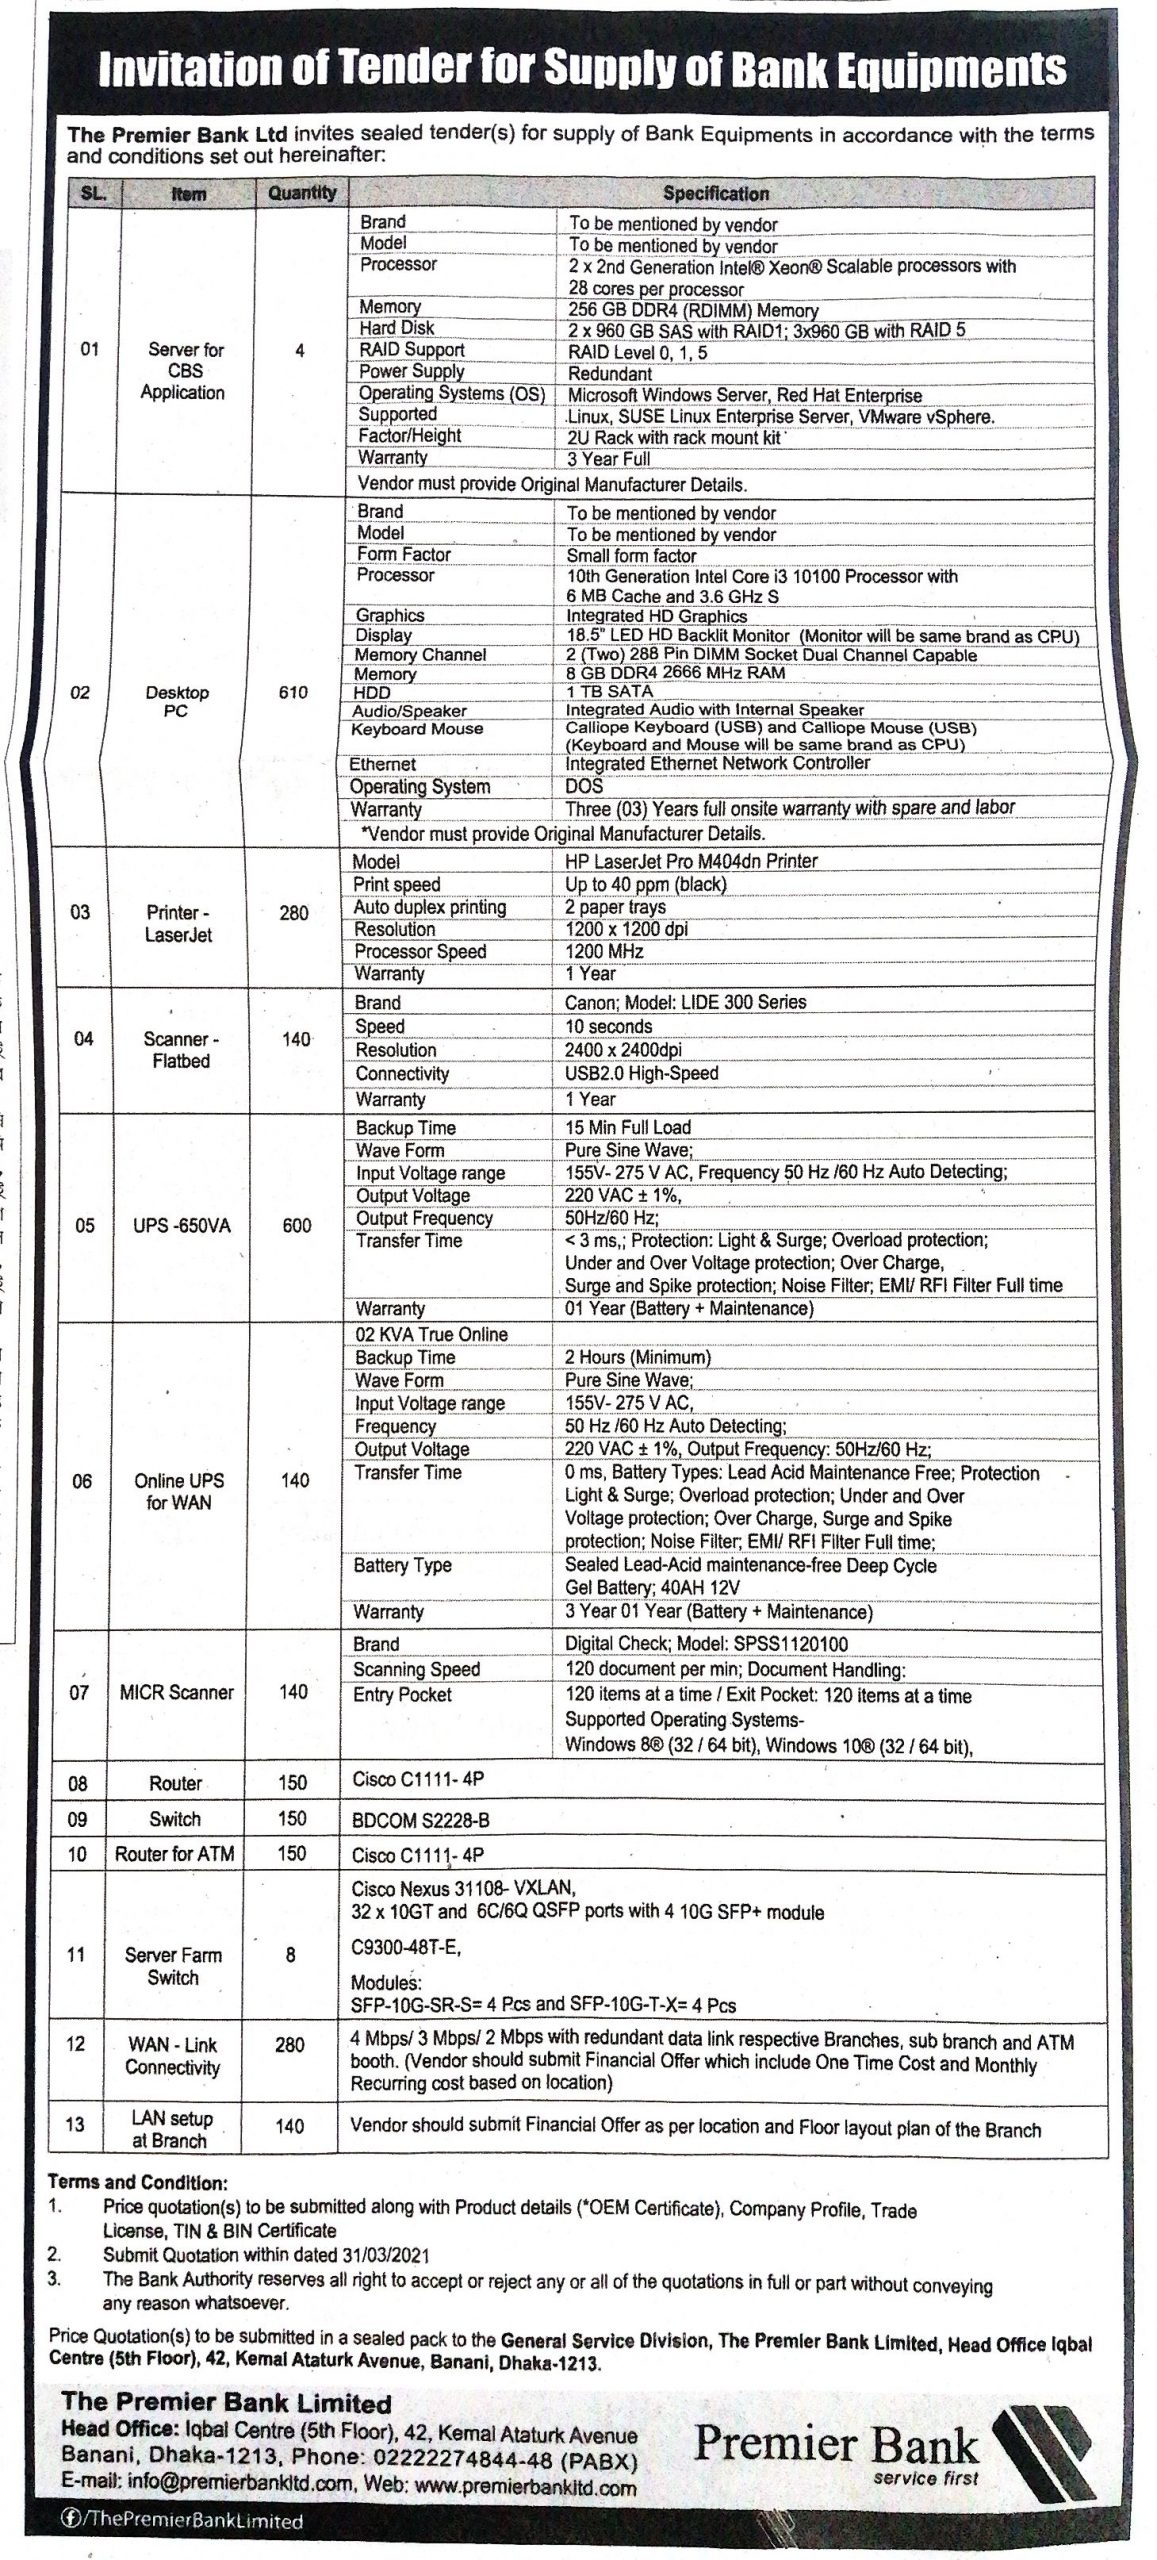 Invitation of Tender For Supply Bank Equipments